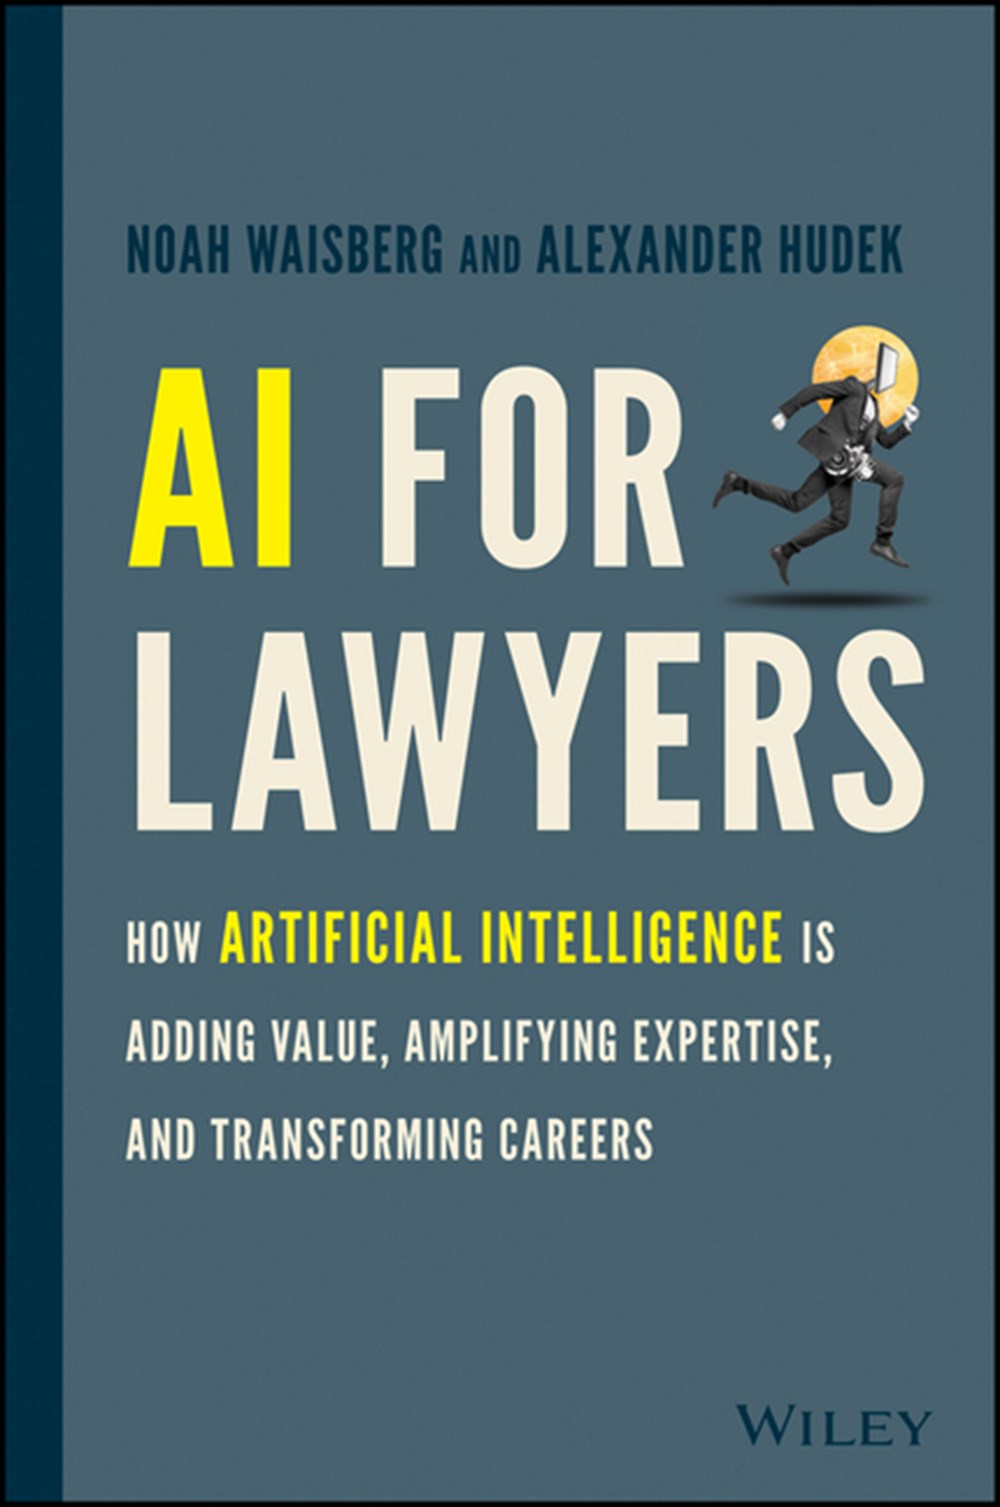 AI for Lawyers How Artificial Intelligence Is Transforming the Legal Profession